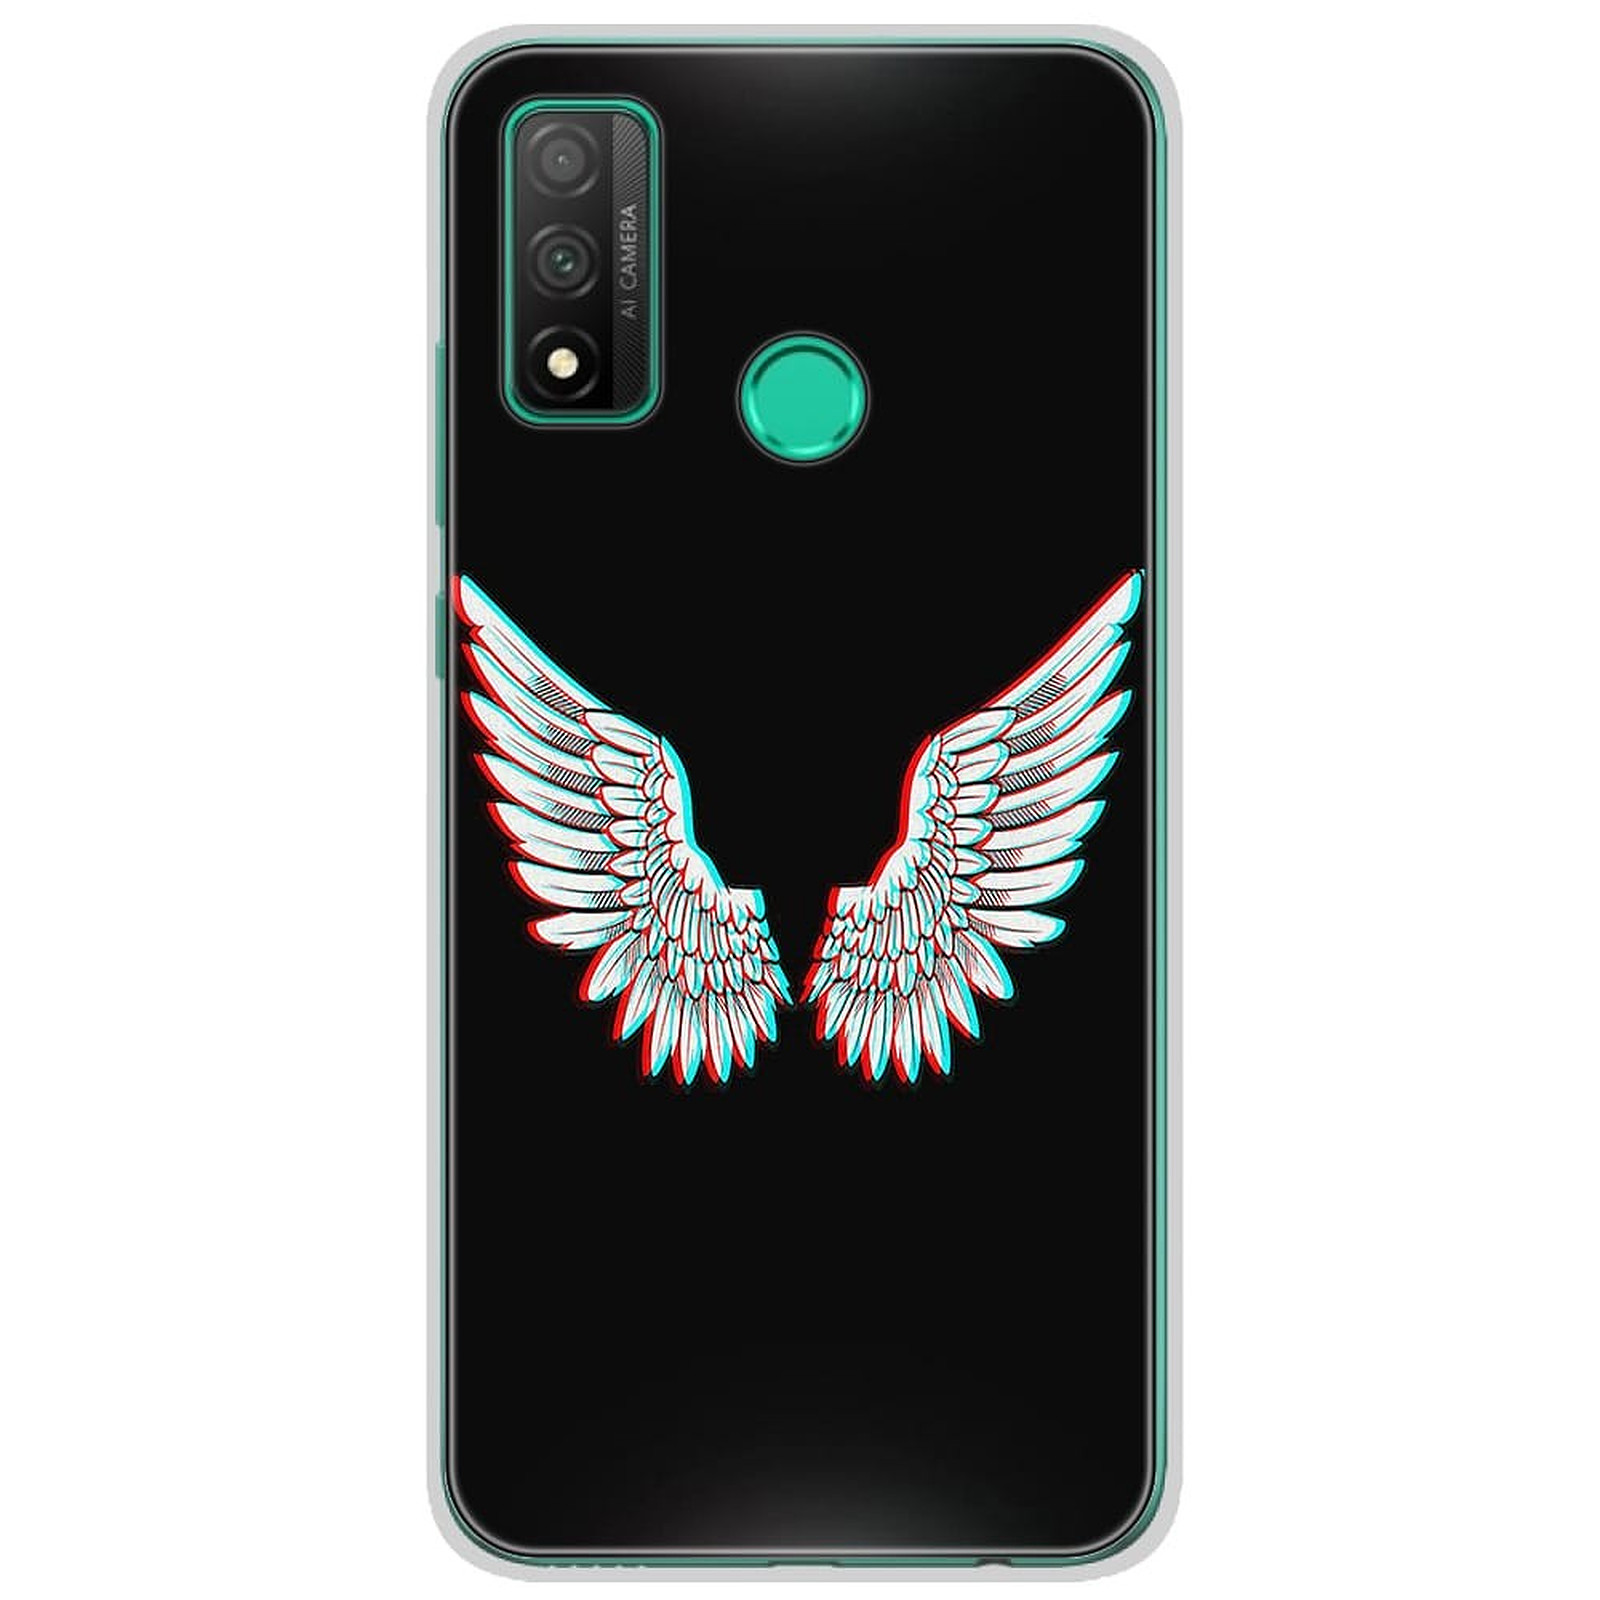 1001 Coques Coque silicone gel Huawei P Smart 2020 motif Ailes d'Ange - Coque telephone 1001Coques